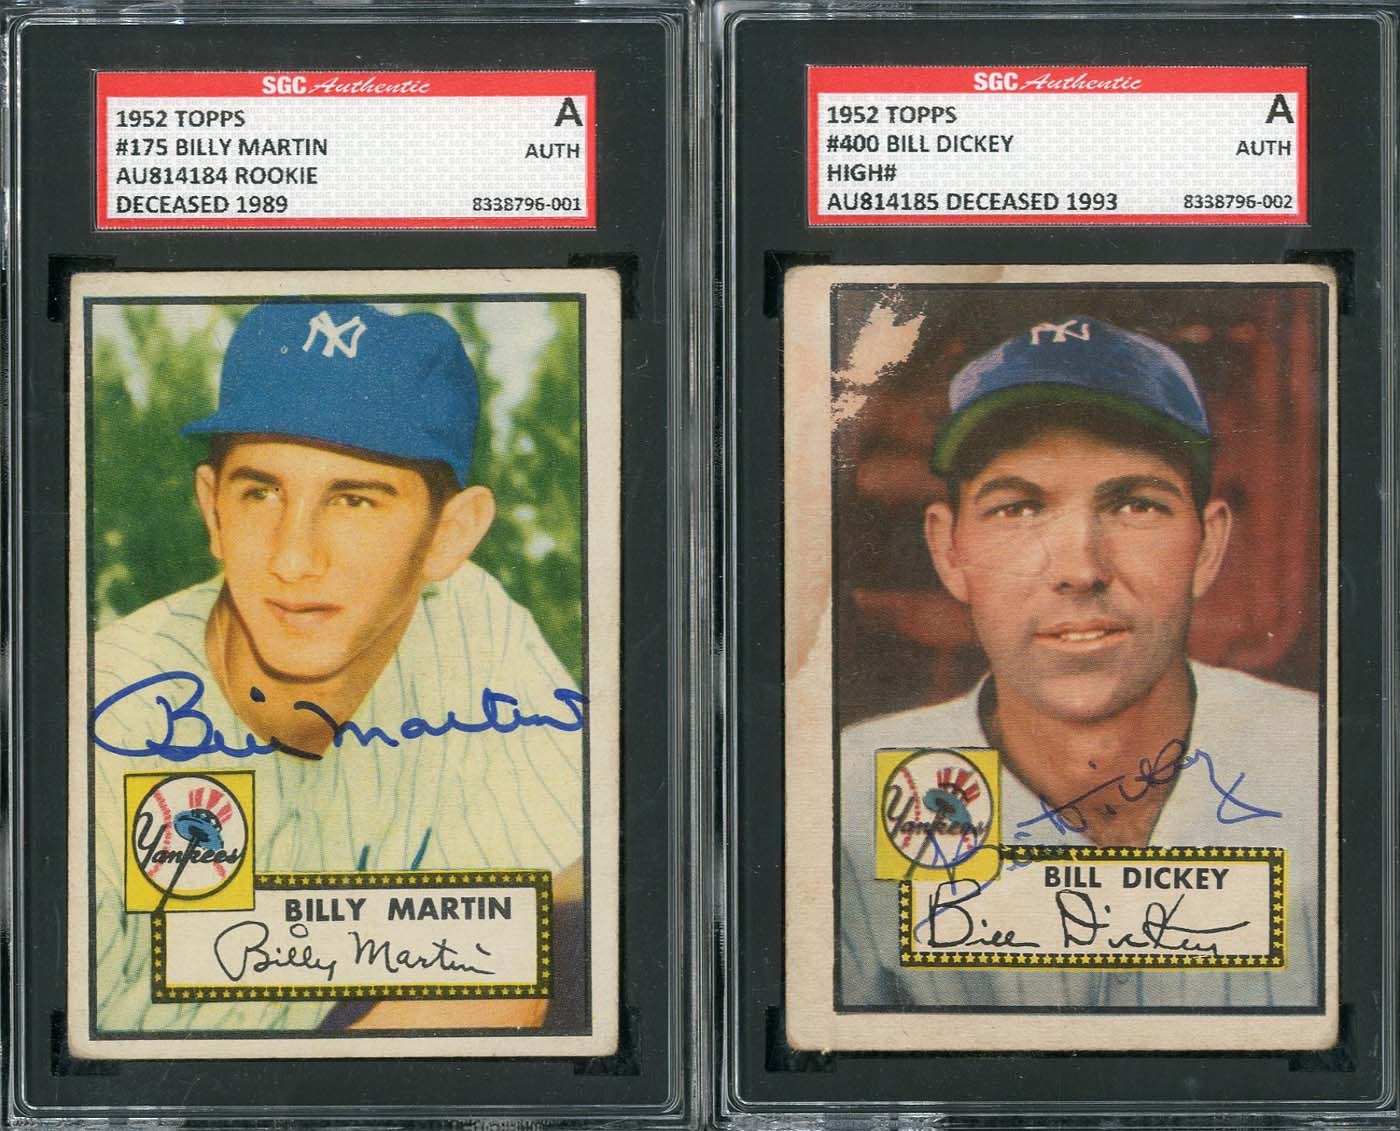 Baseball Autographs - 1952 Topps Collection of (67) Signed Cards with (8) HOFers including Dickey, Berra and Martin! - Two SGC Authenticated